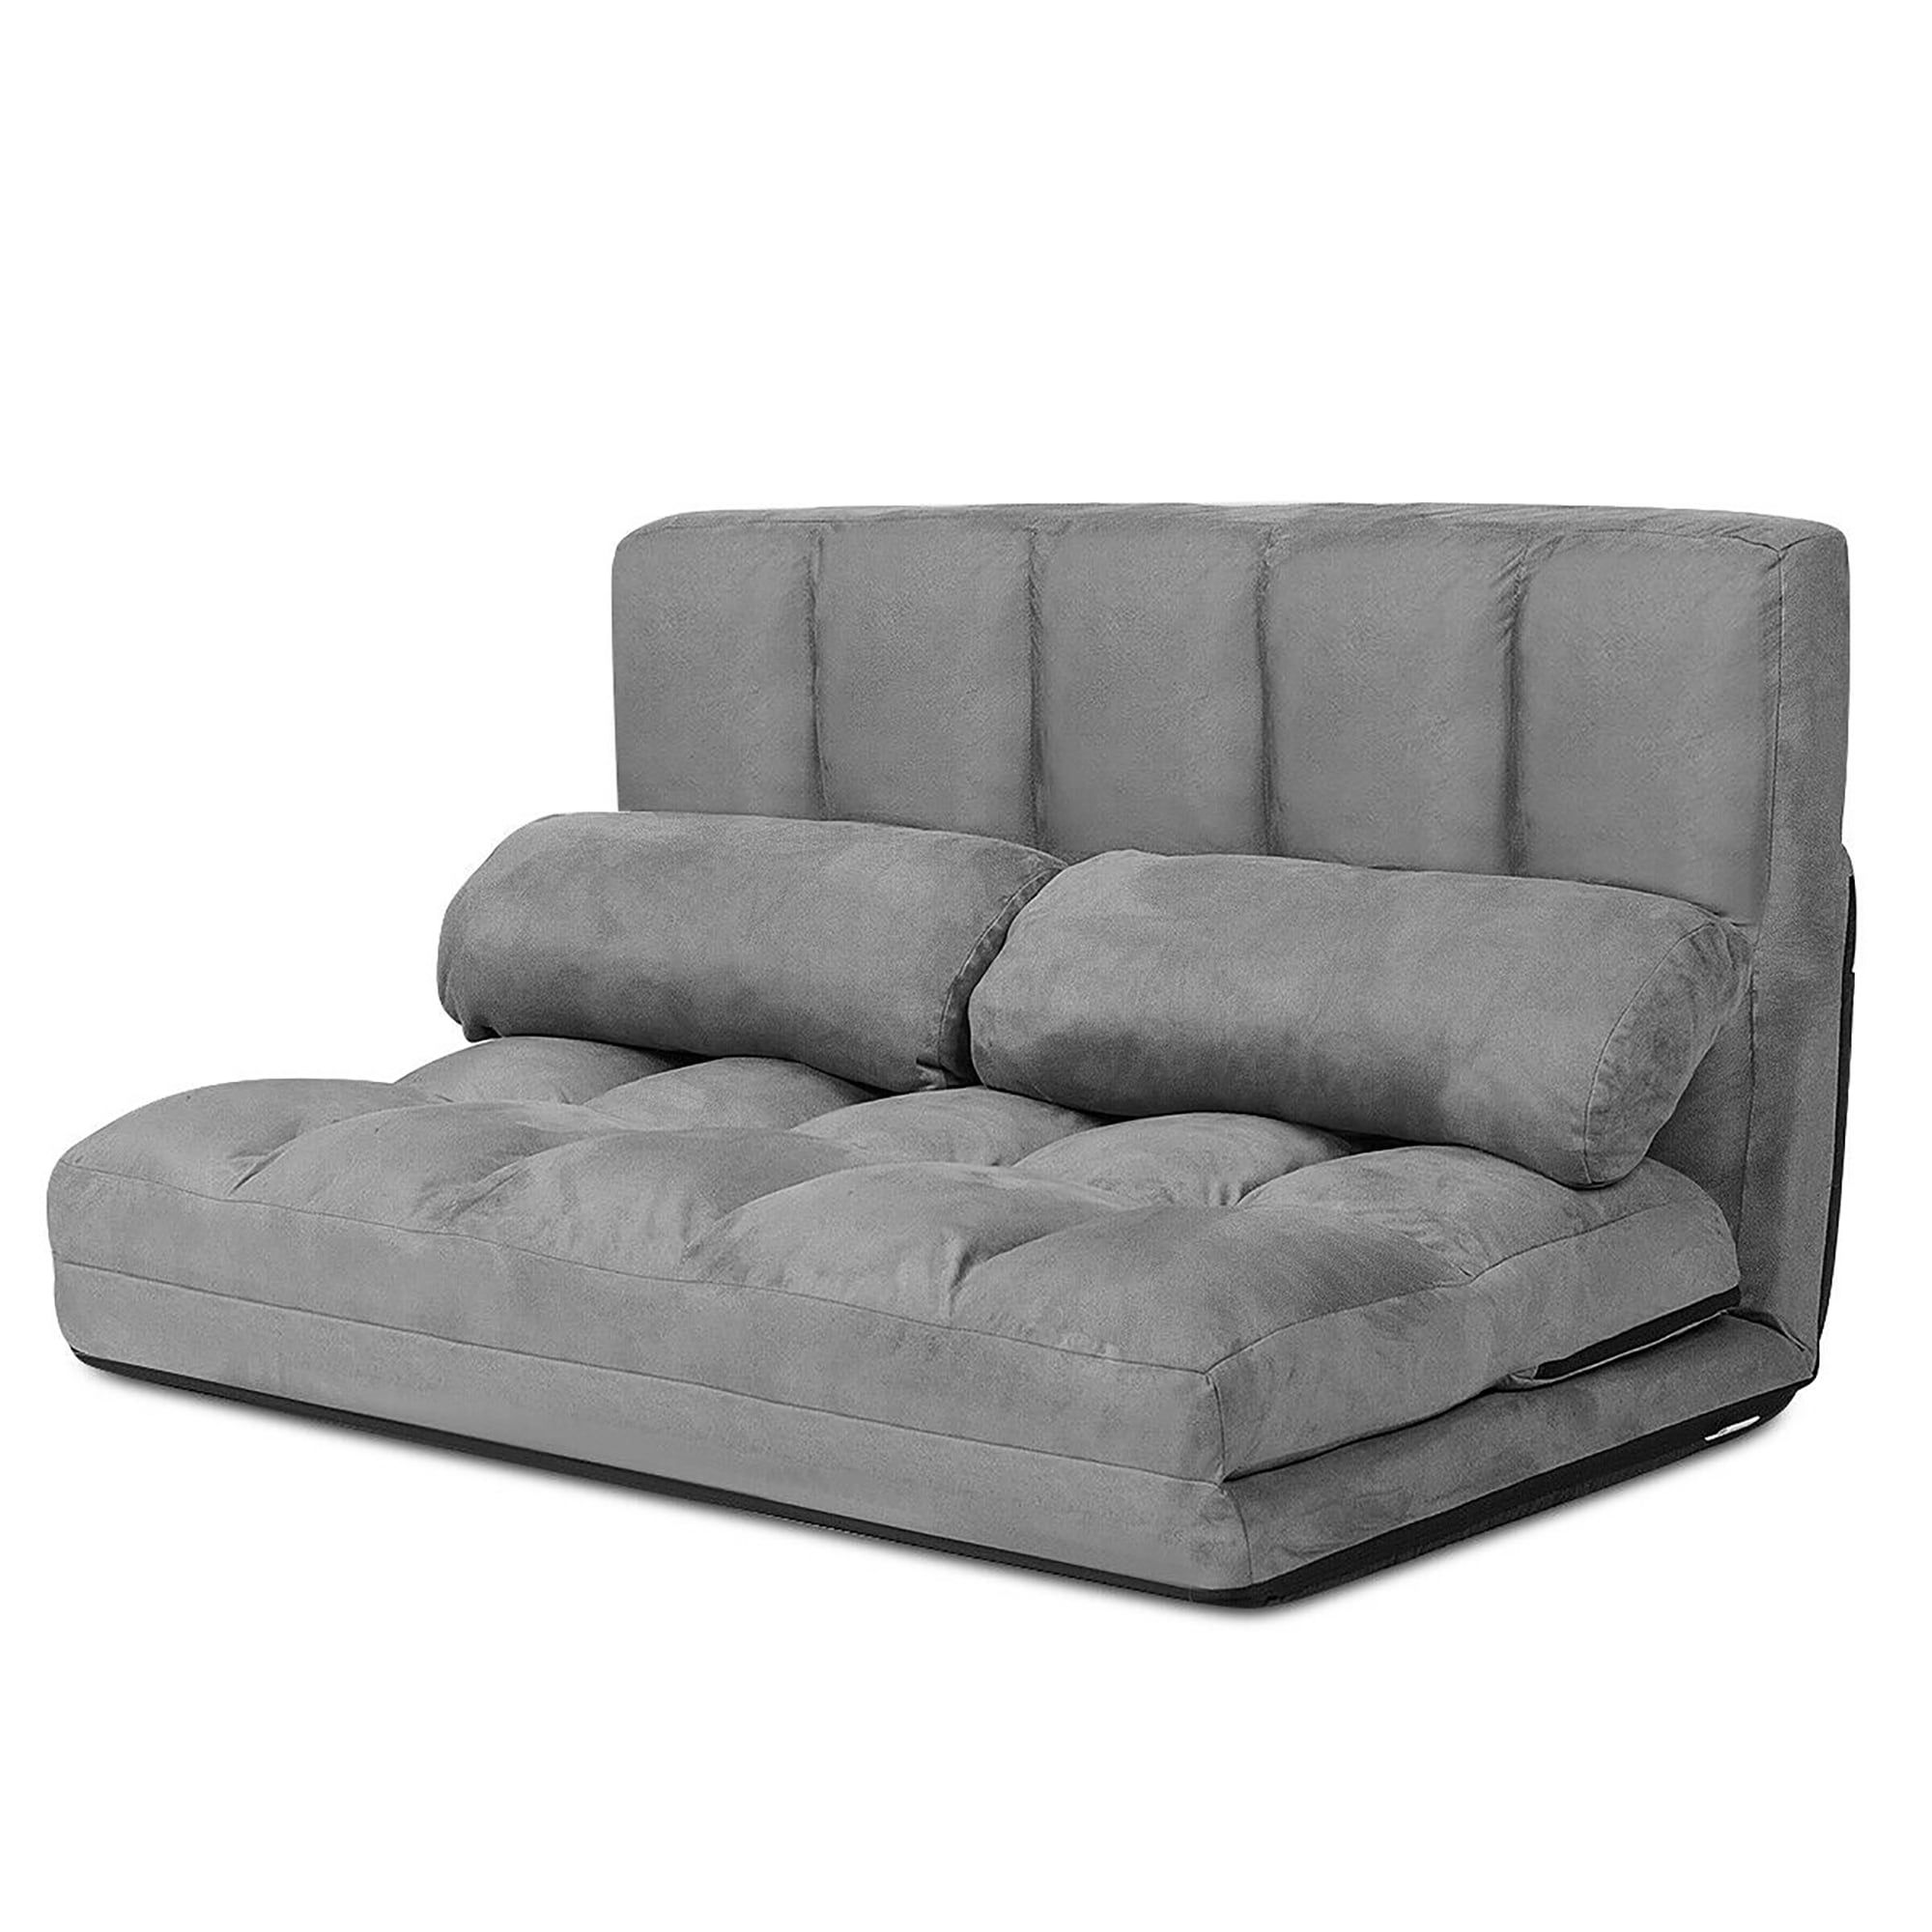 Costway Foldable Floor Sofa Bed 6 Position Adjustable Lounge Couch With For 2 In 1 Foldable Sofas (View 13 of 20)